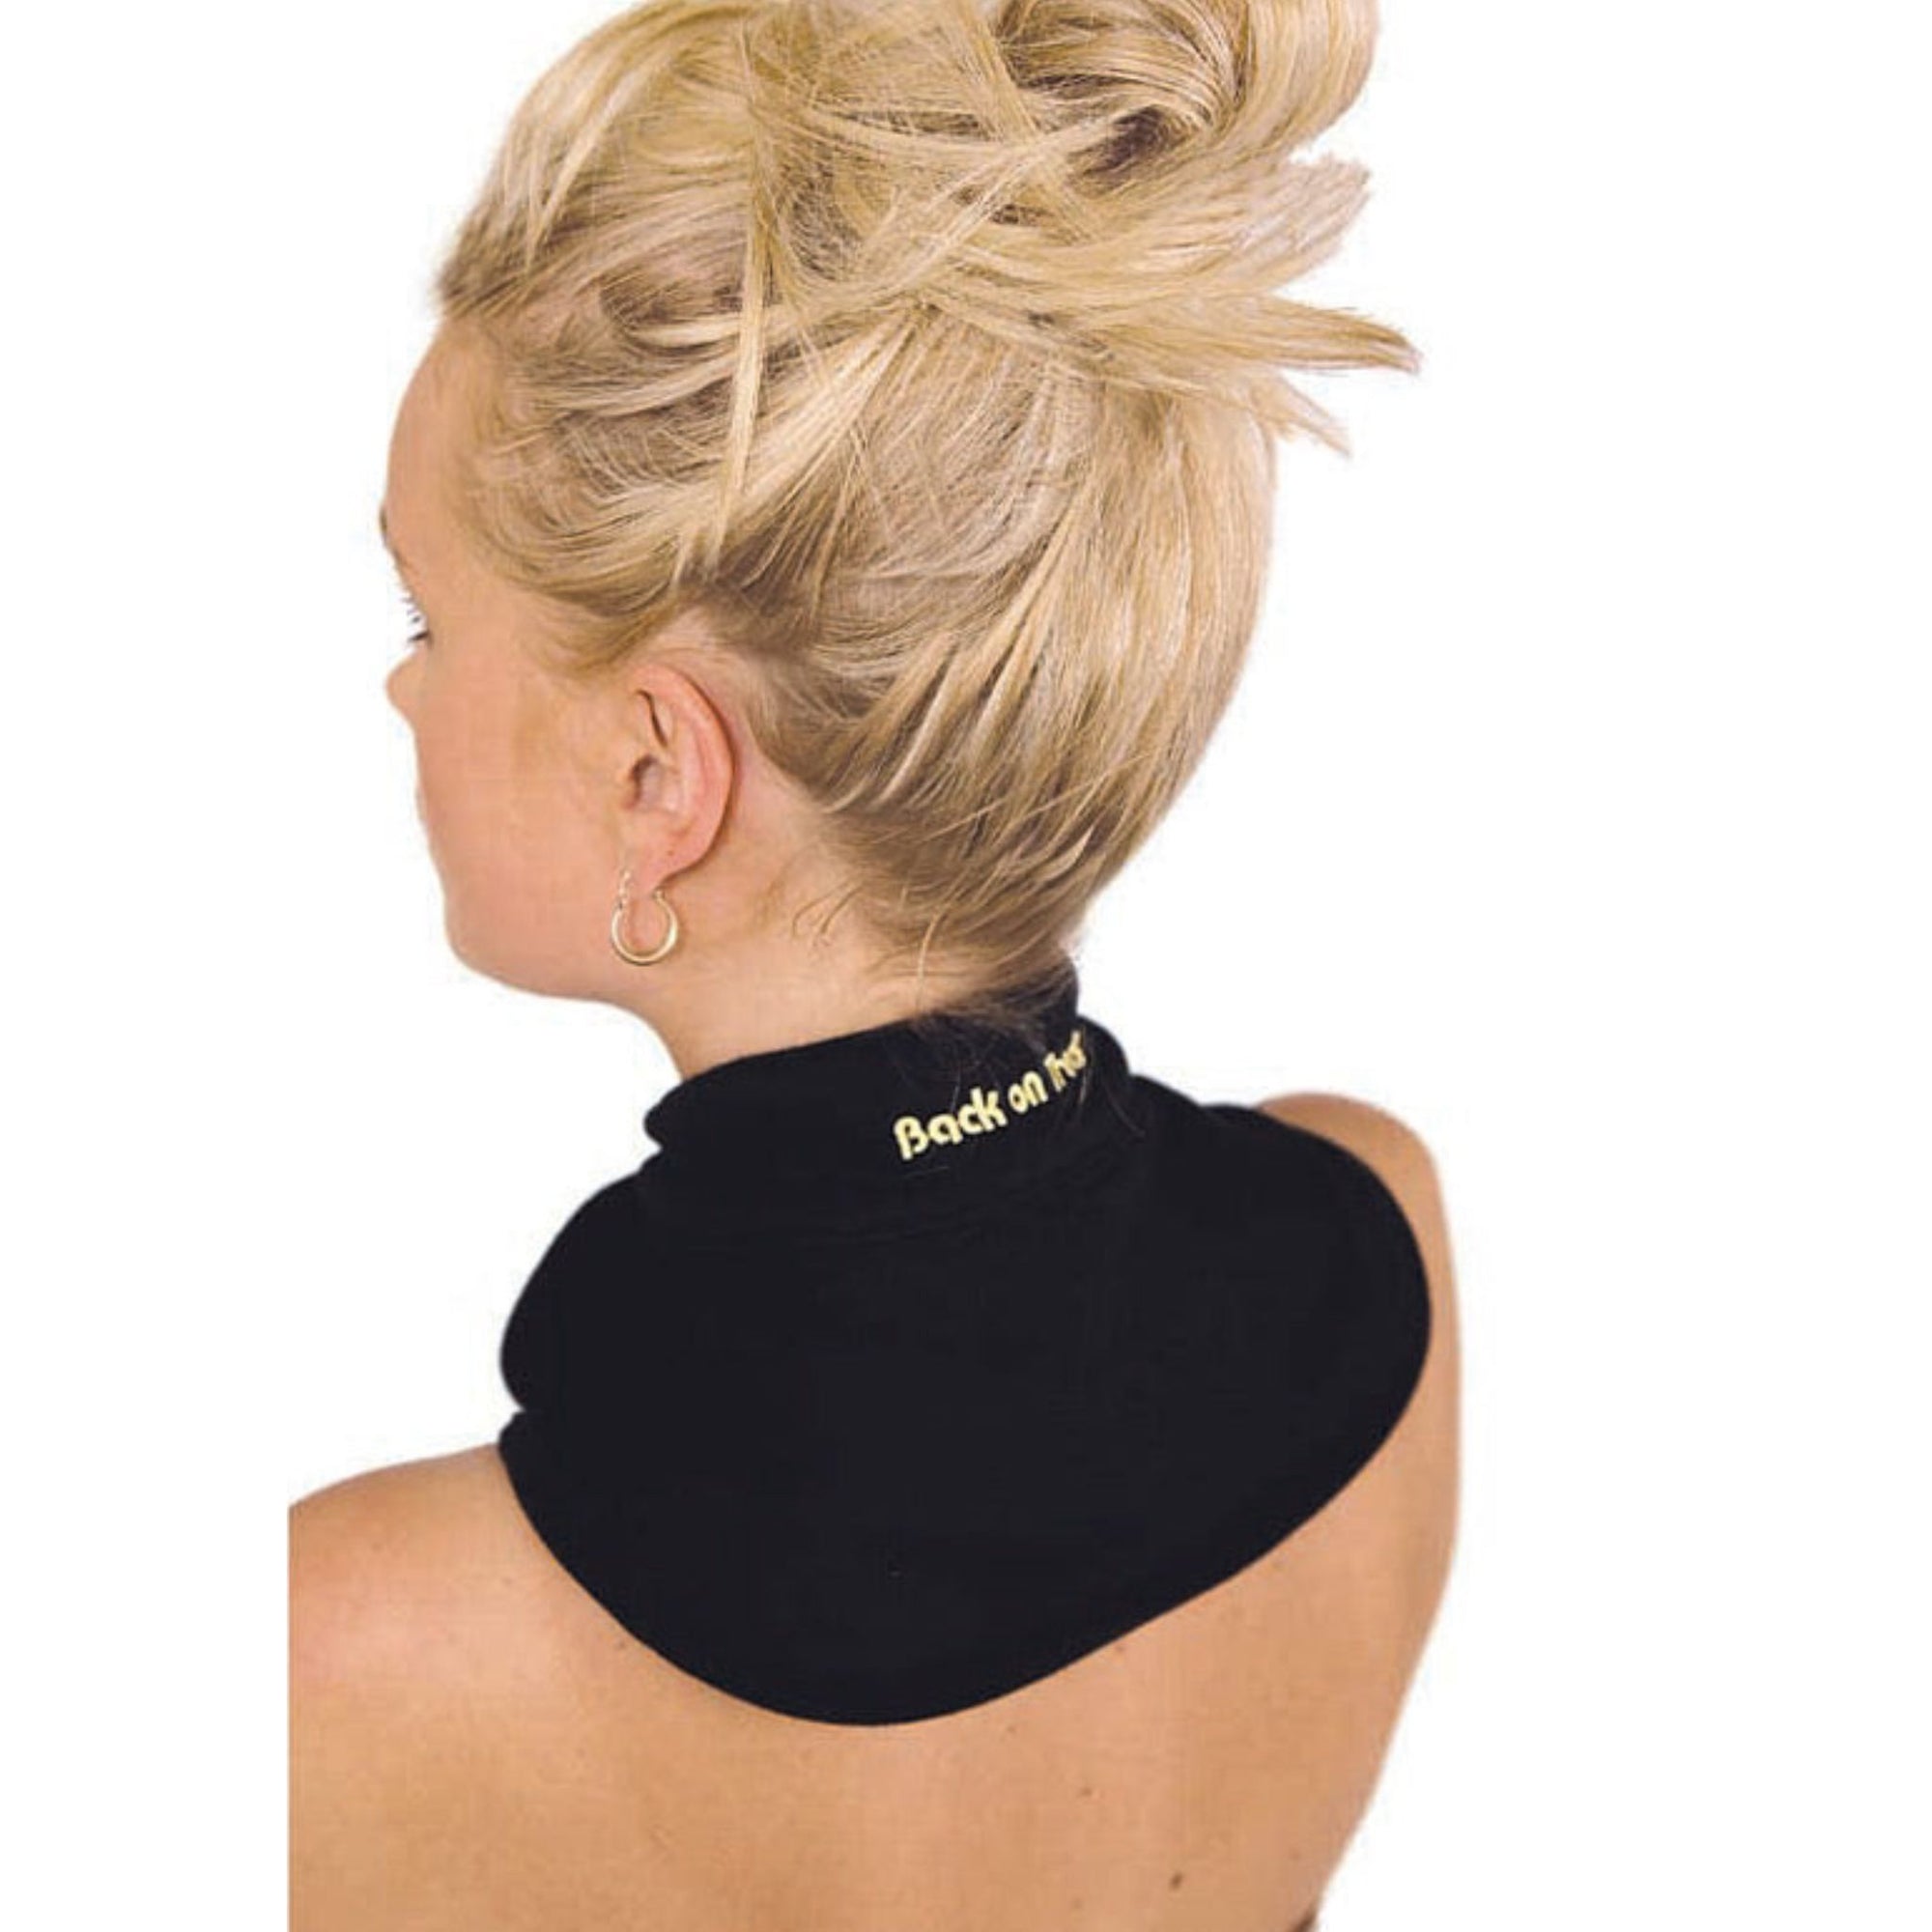 black neck cover with gold embroidered logo. View from the back.